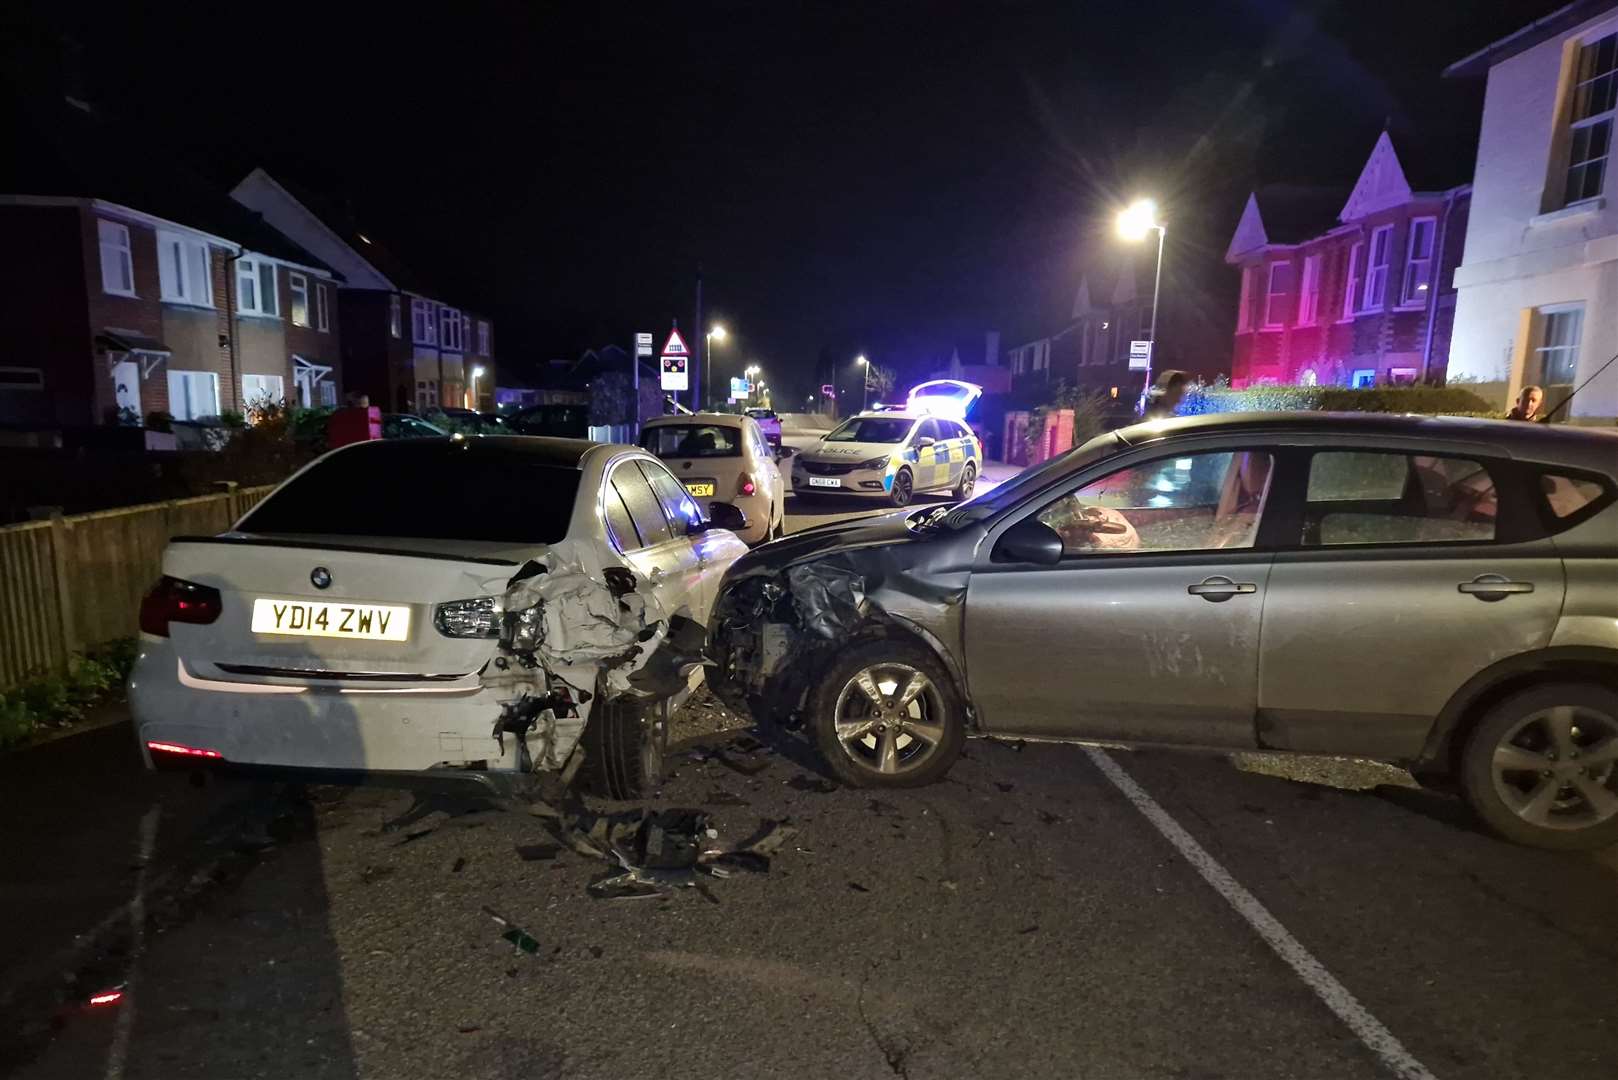 The scene of the crash in Ash Road, Sandwich. Picture: Charley Clements-Mills